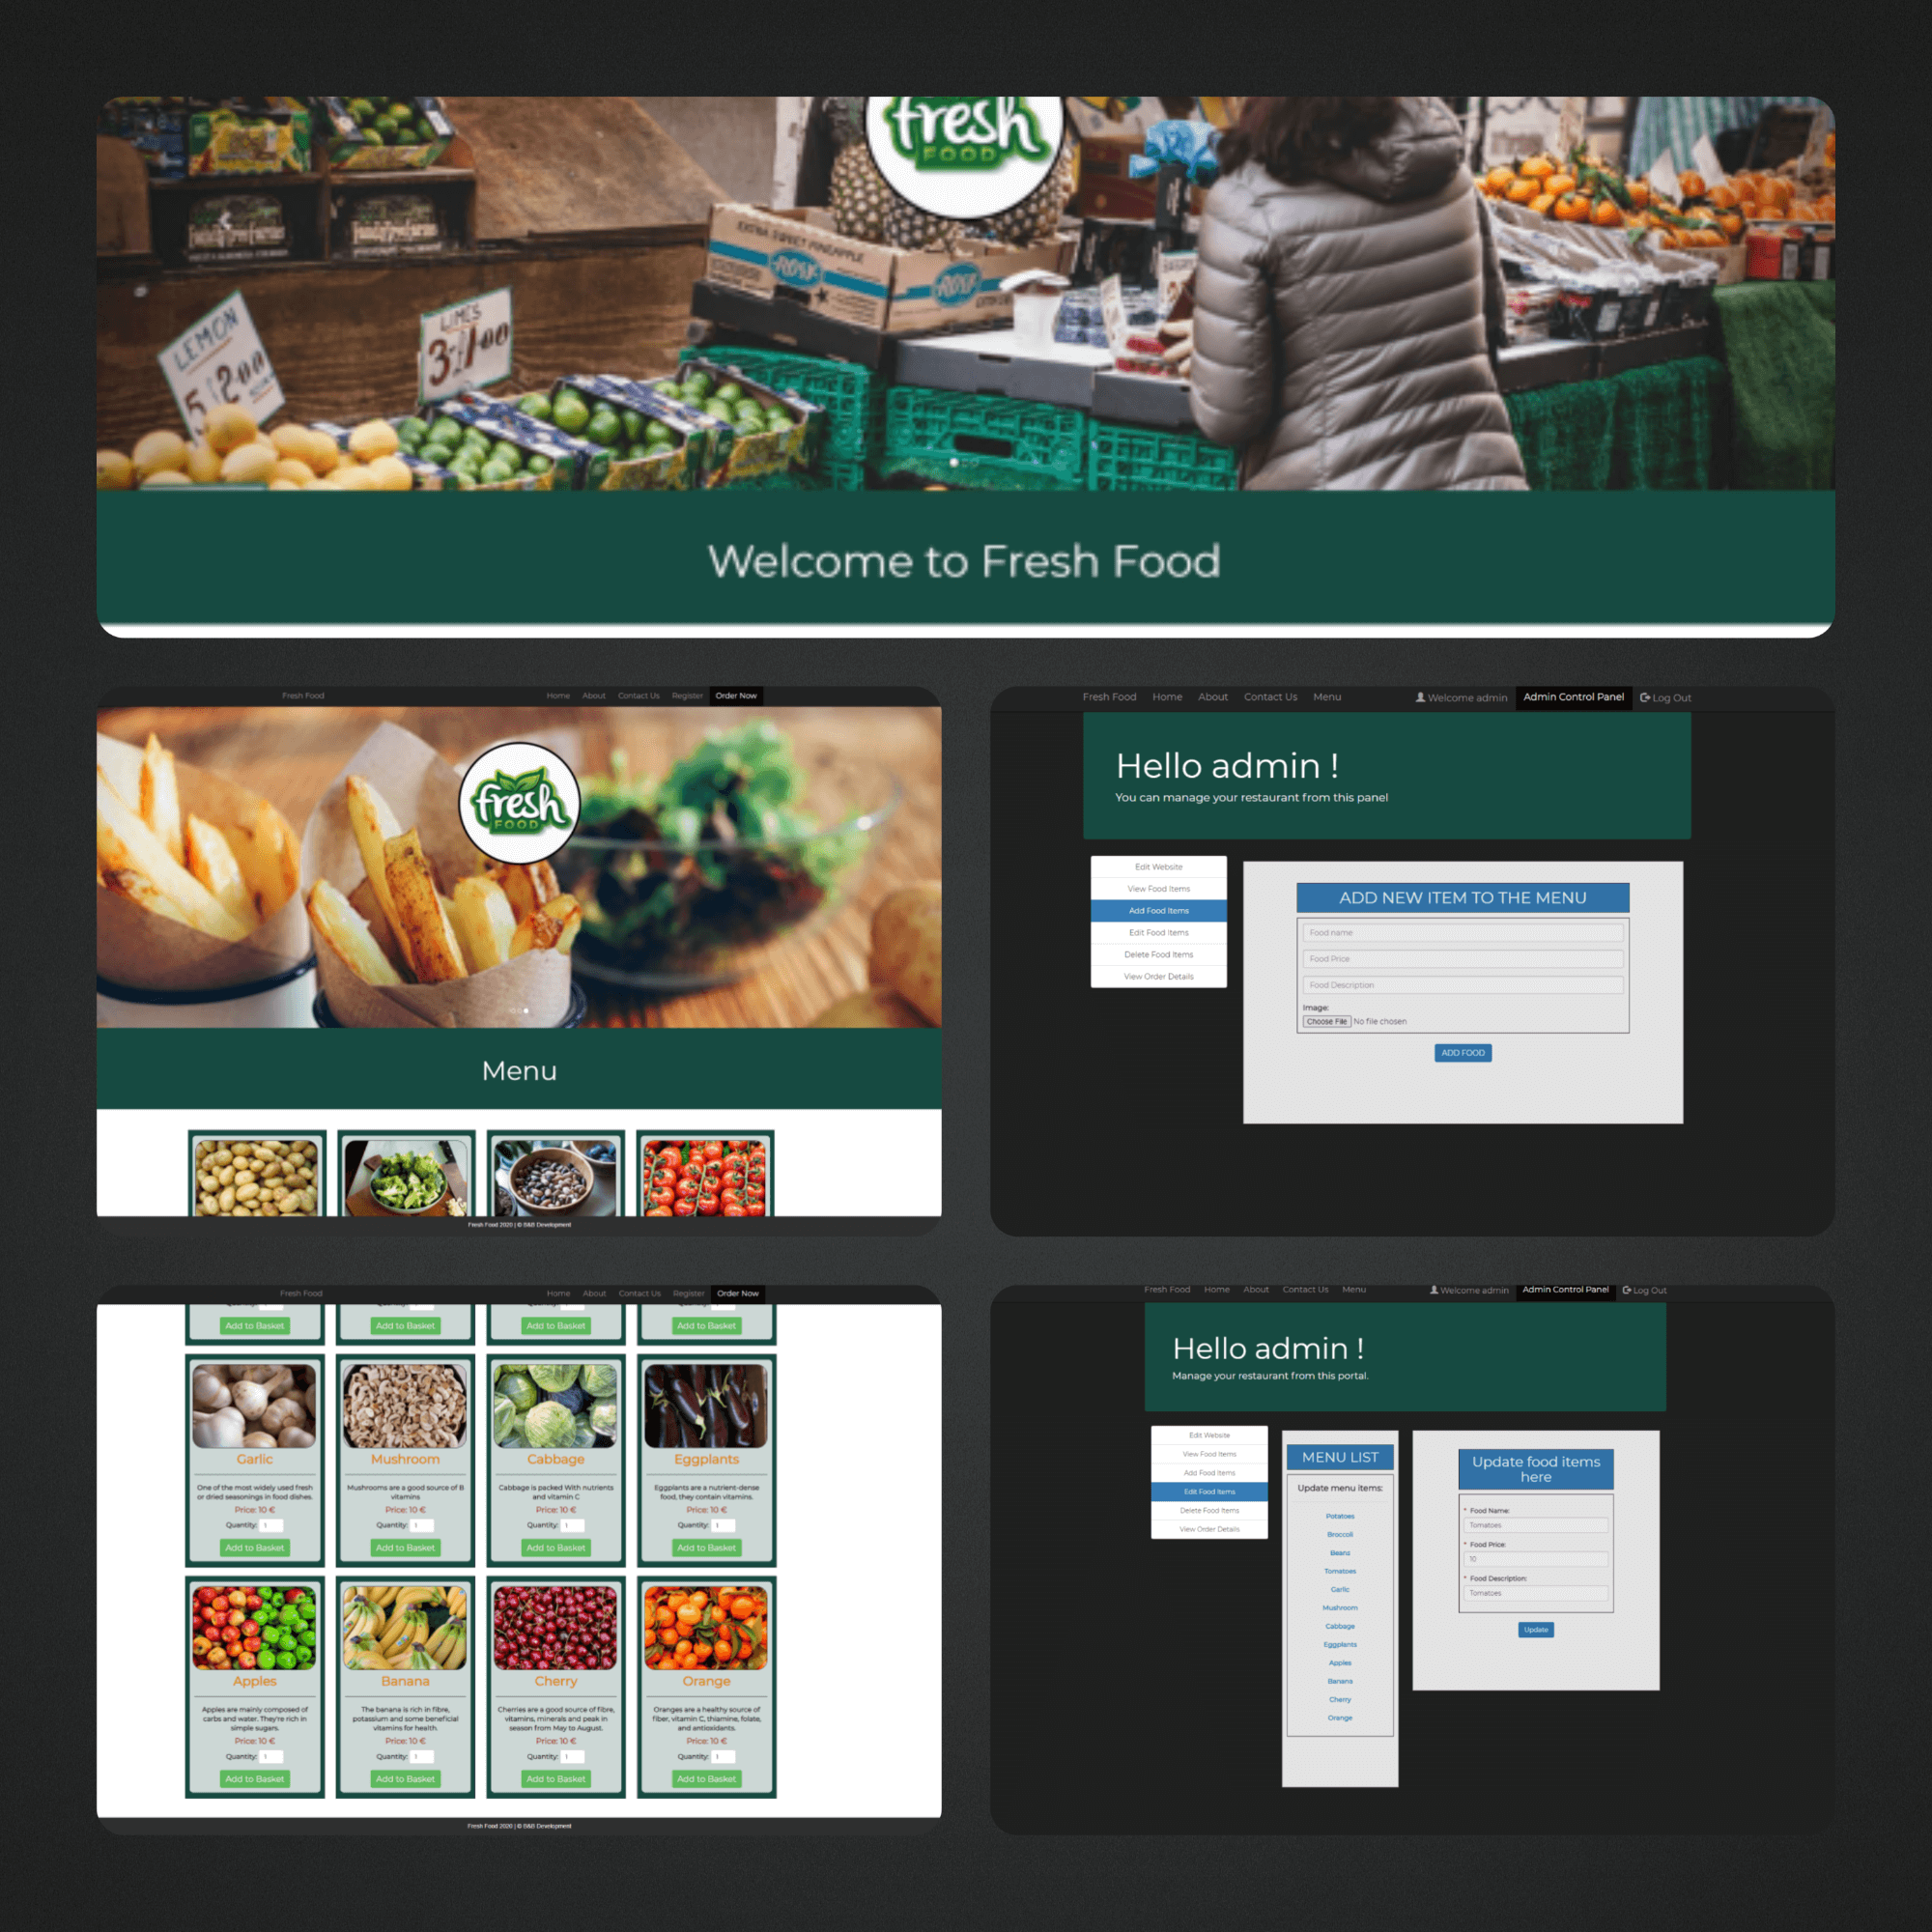 Screenshots of my project food ordering website displaying menu items and other features